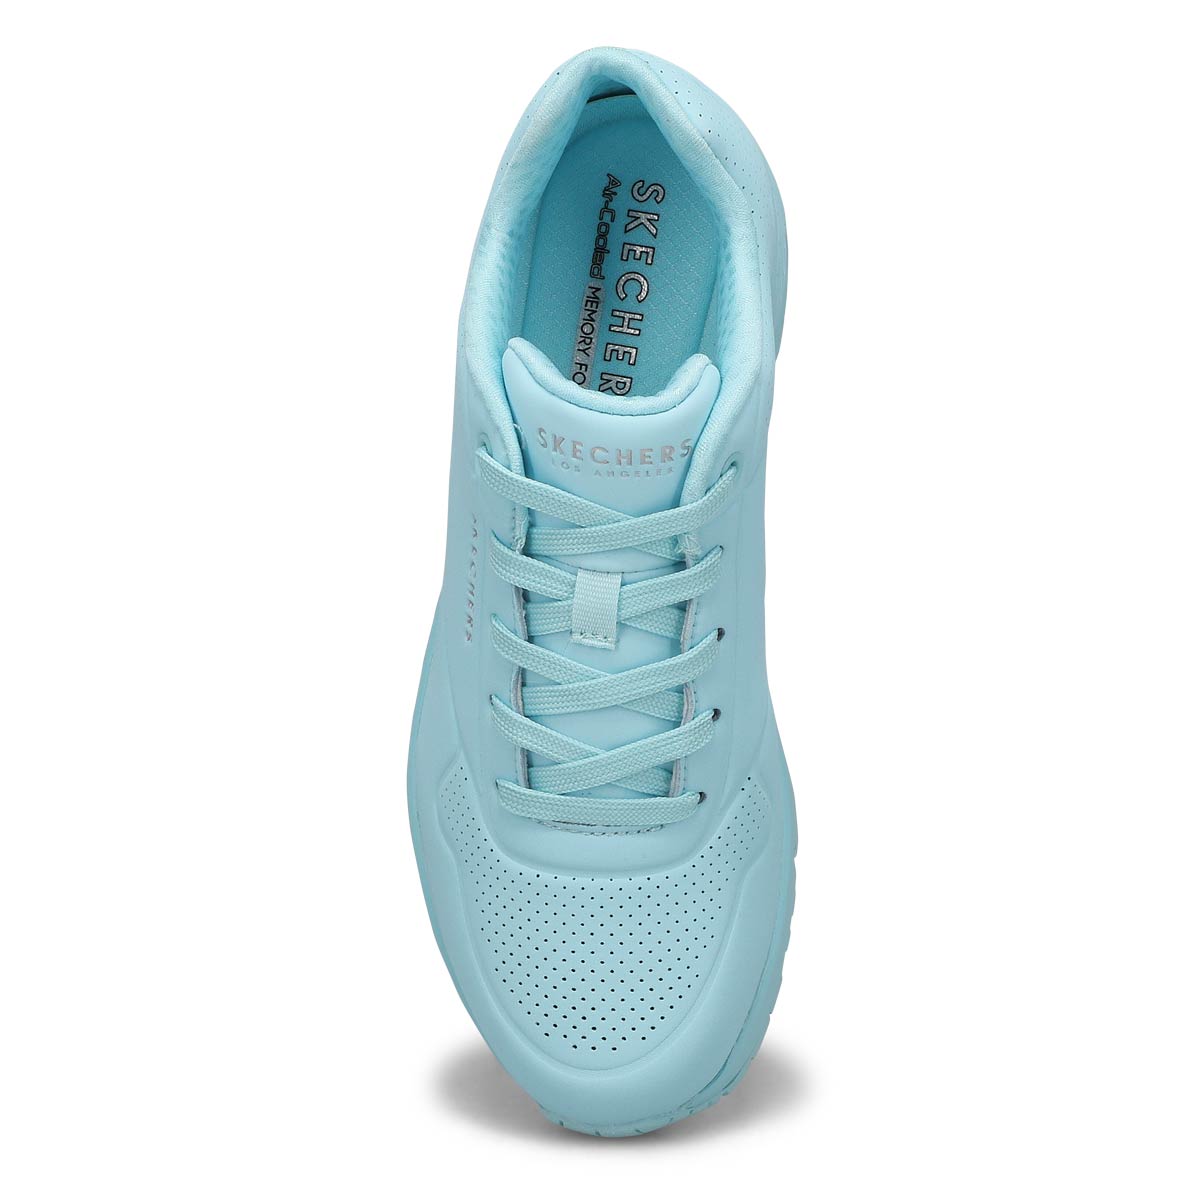 Women's Uno Stand On Air Sneaker - Light Blue